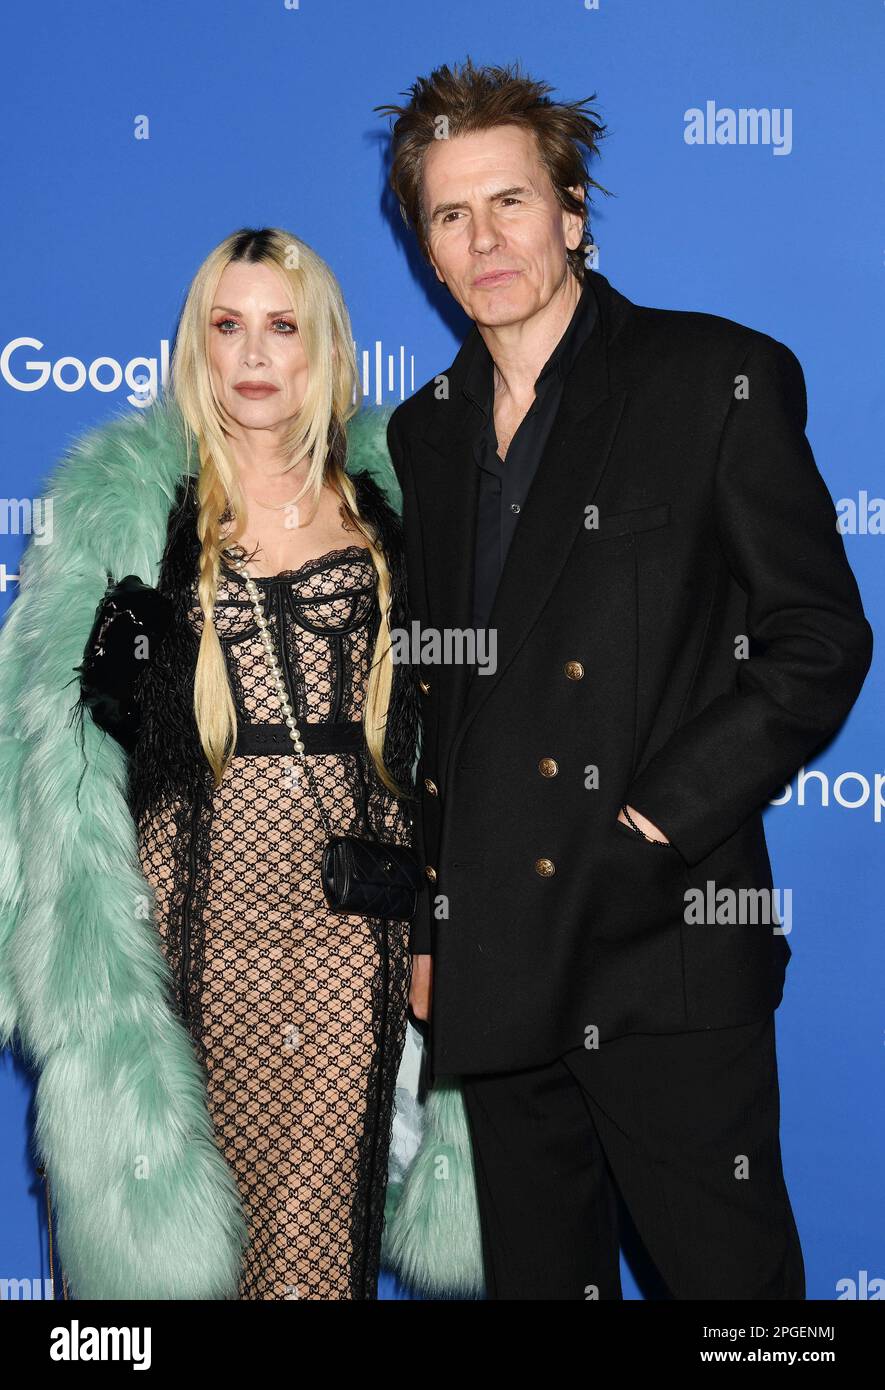 Los Angeles, California, USA. 21st Mar, 2023. (L-R) Gela Nash-Taylor and John Taylor attend the Fashion Trust US Awards at Goya Studios on March 21, 2023 in Los Angeles, California. Credit: Jeffrey Mayer/Jtm Photos/Media Punch/Alamy Live News Stock Photo